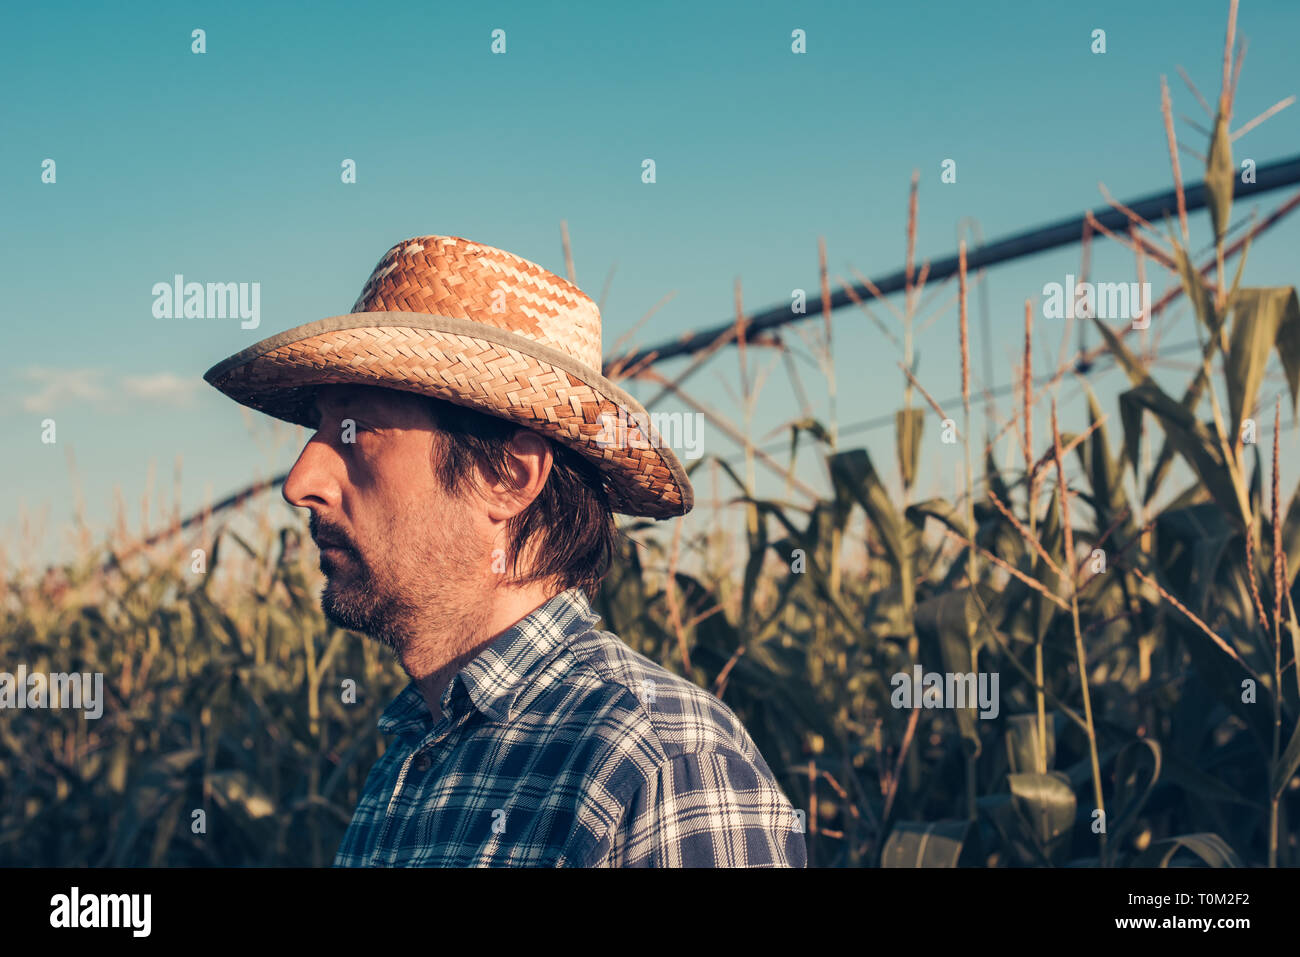 Portrait of serious farmer in corn field, looking confident and determined Stock Photo